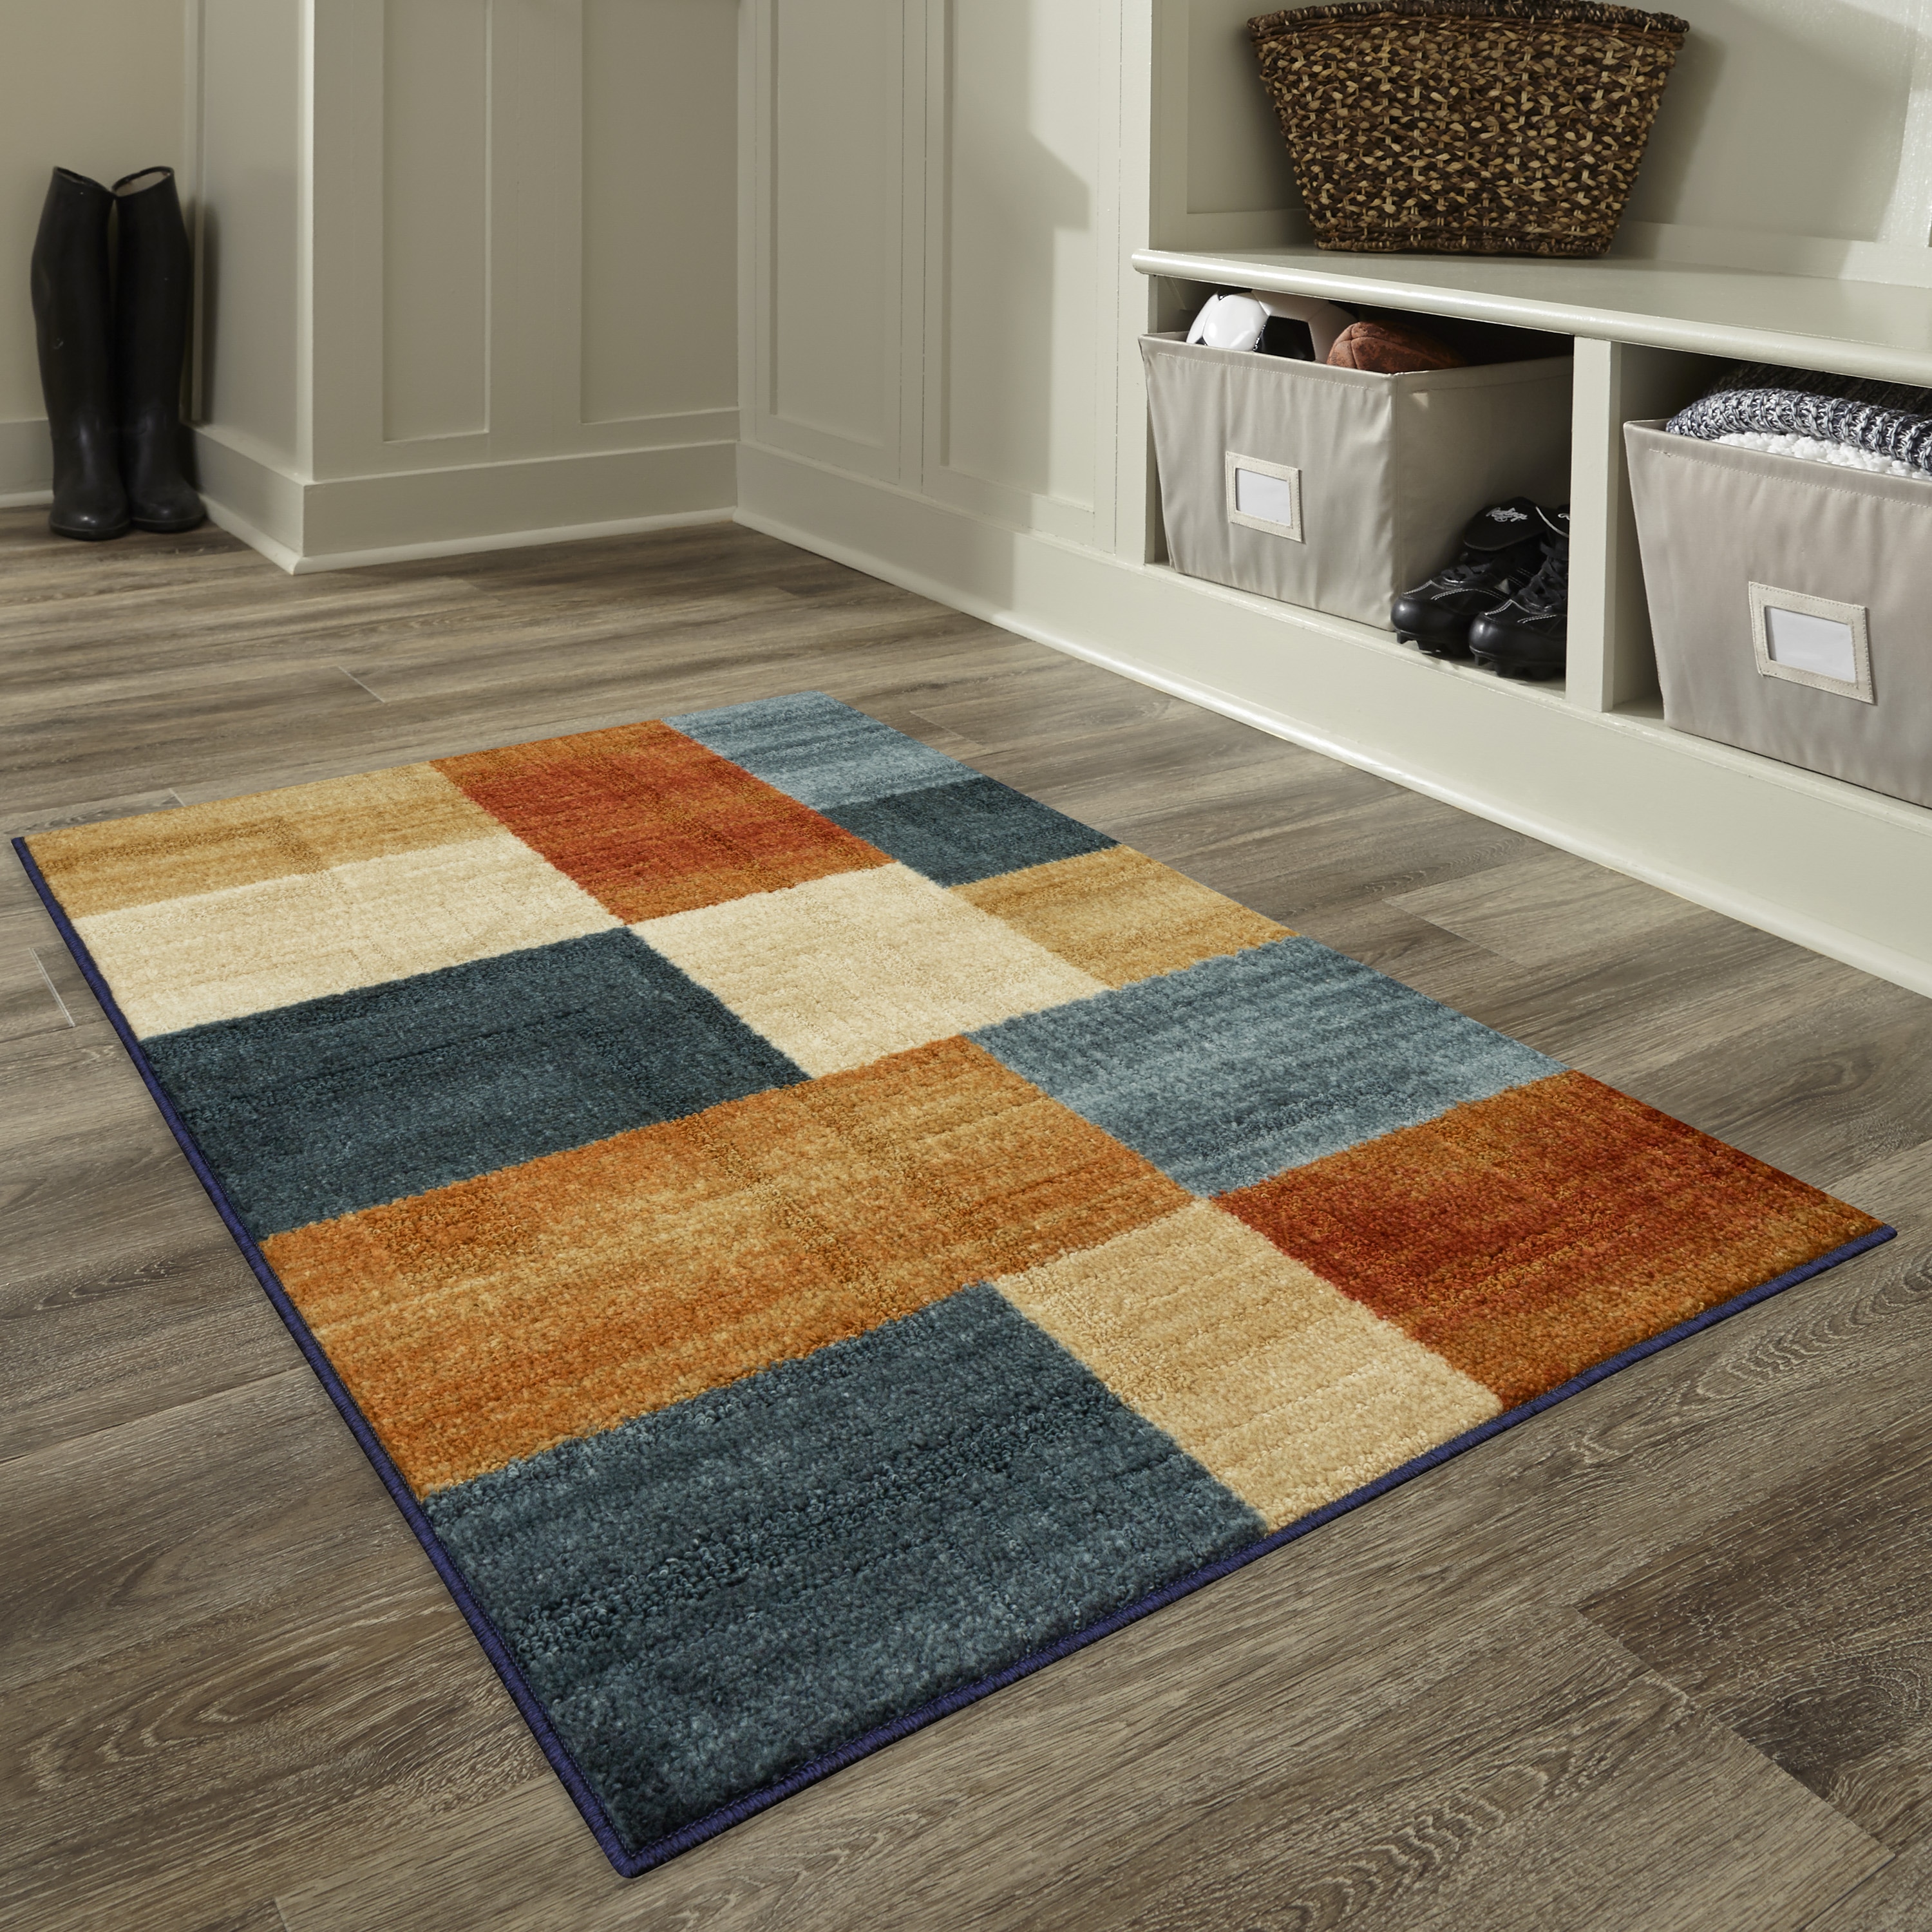 3 X 4 Indoor Geometric Mid-century Modern Machine Washable Throw Rug Polyester | - allen + roth with STAINMASTER B5174414